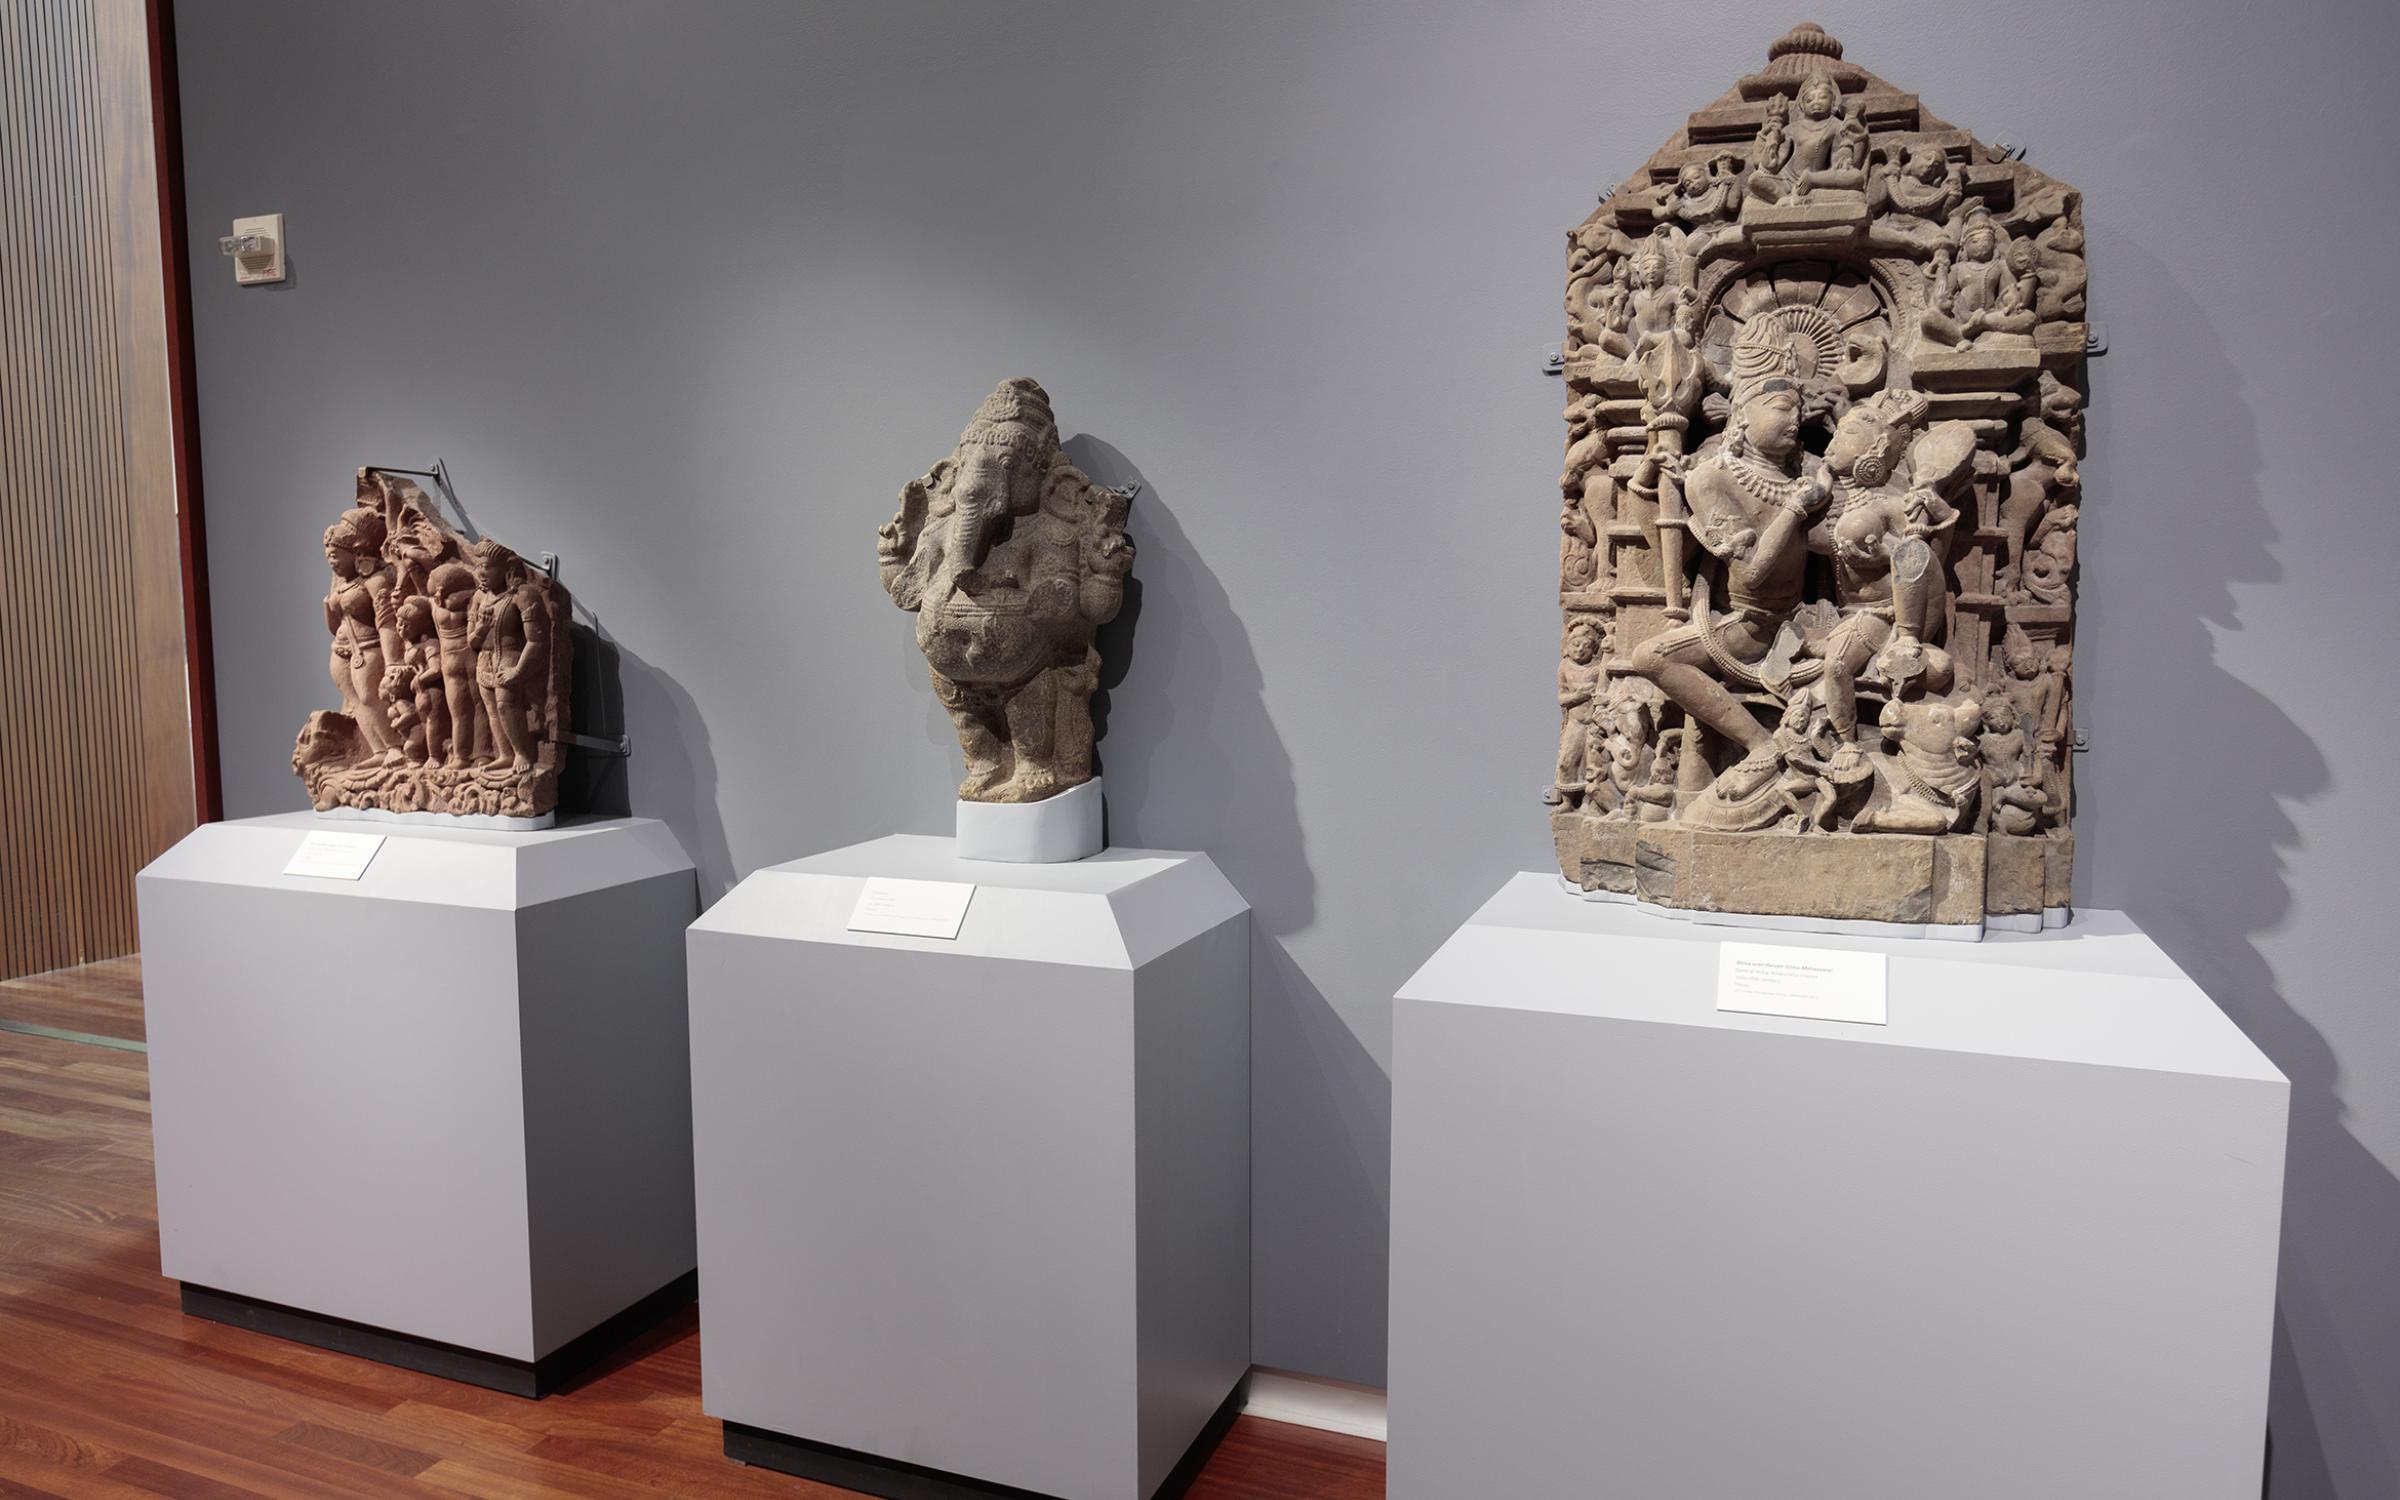 There are three intricately carved deities lined up on individual stands against a light grey wall.